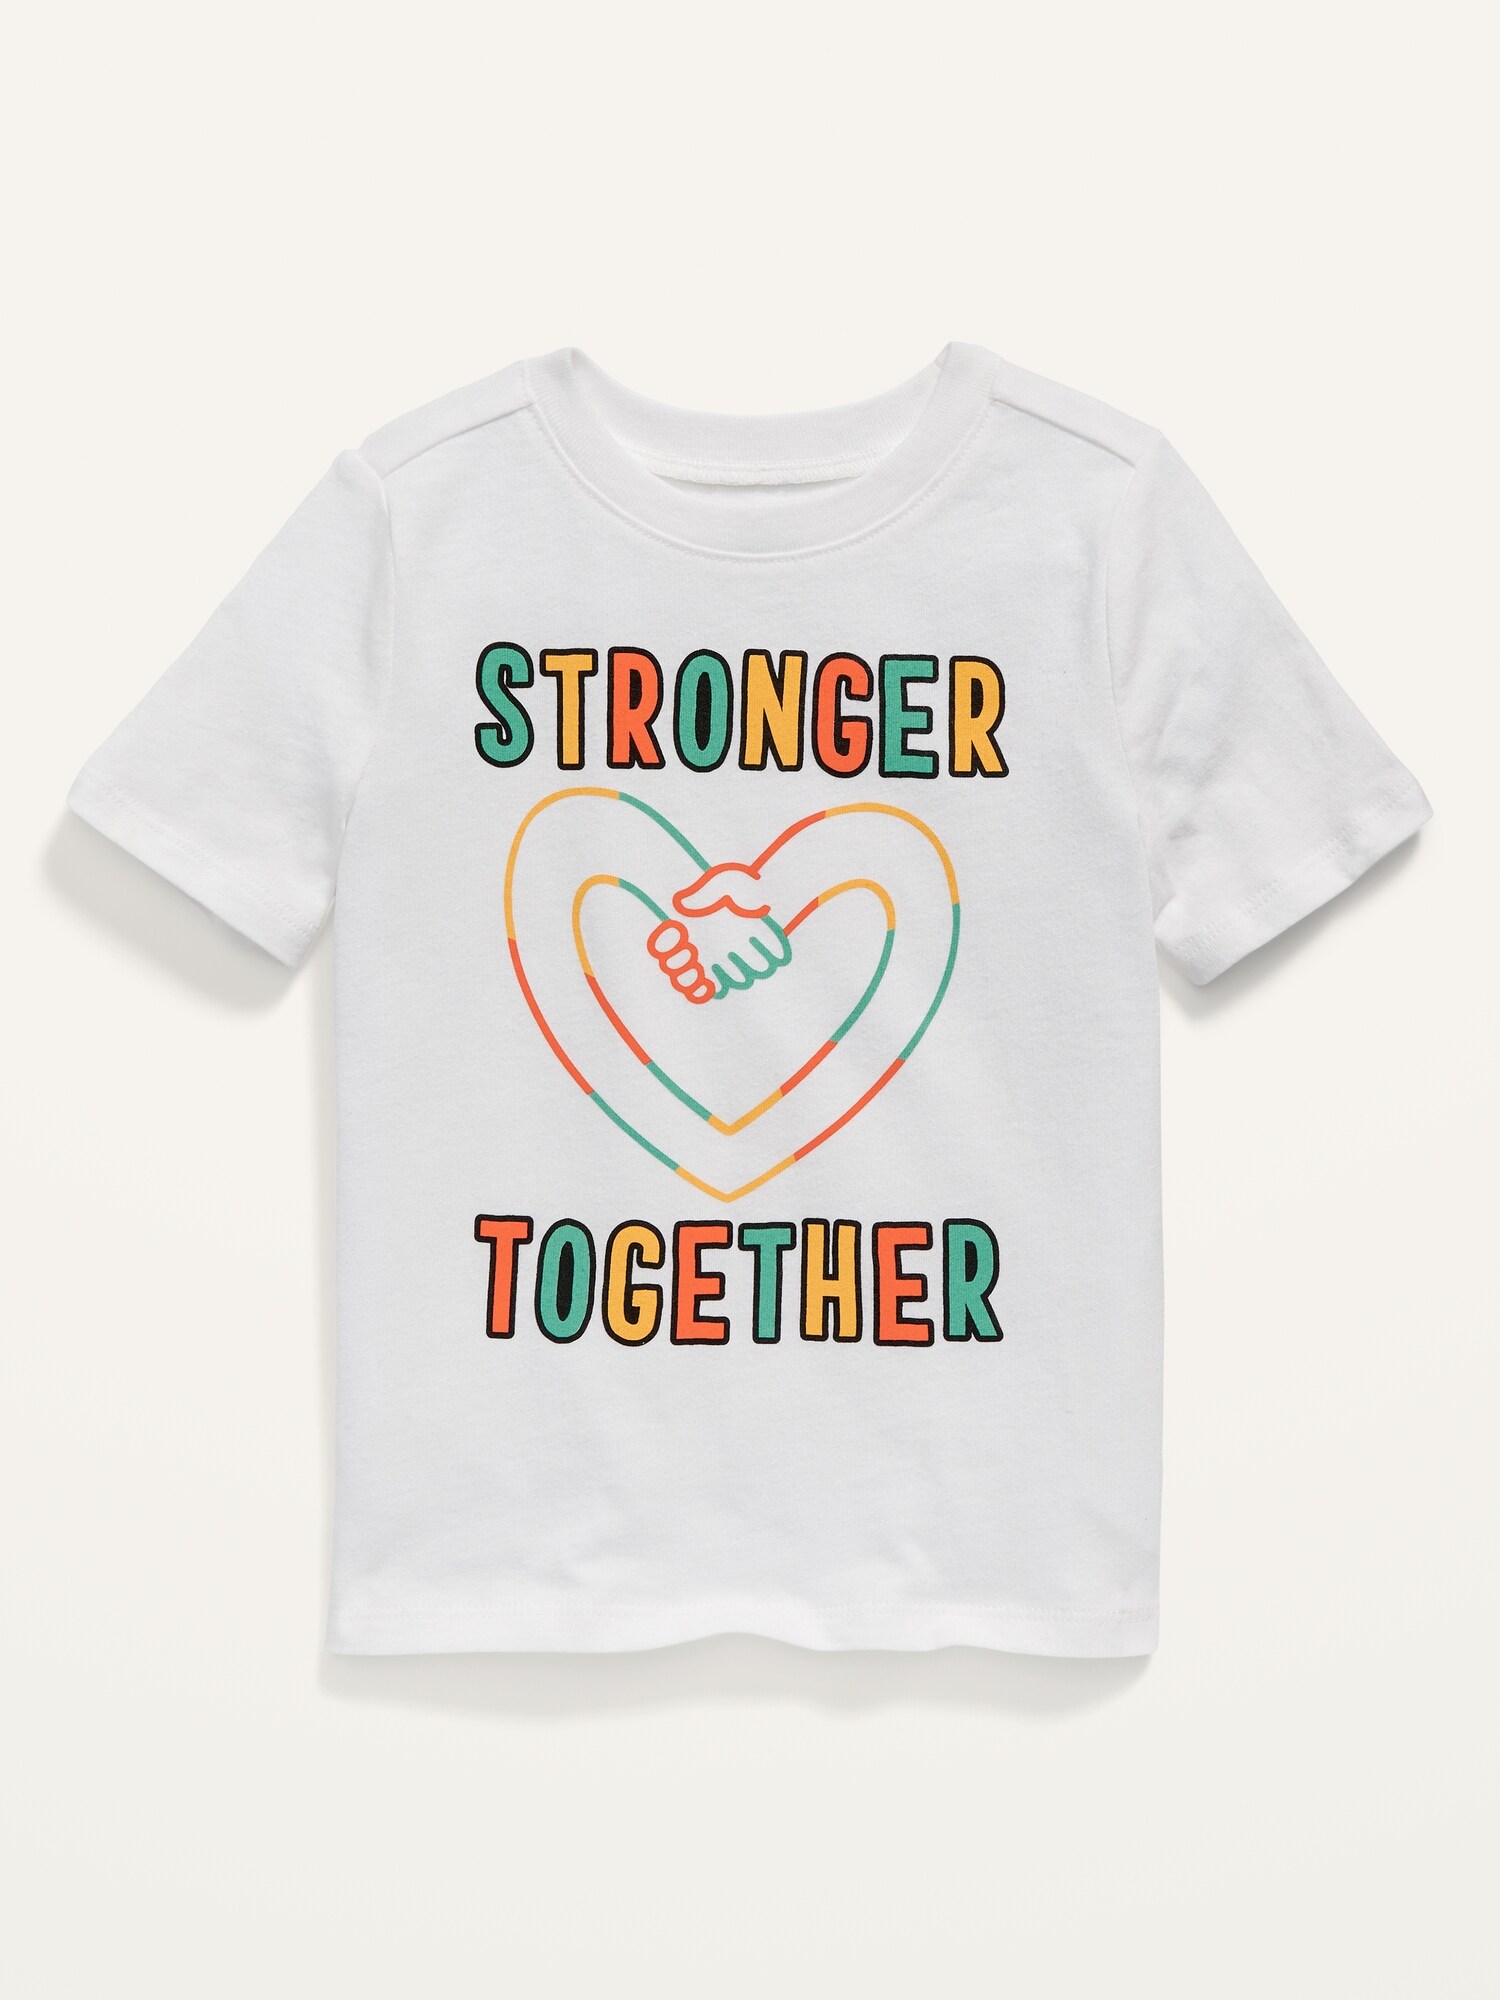 Unisex Short-Sleeve Graphic Tee for Toddler